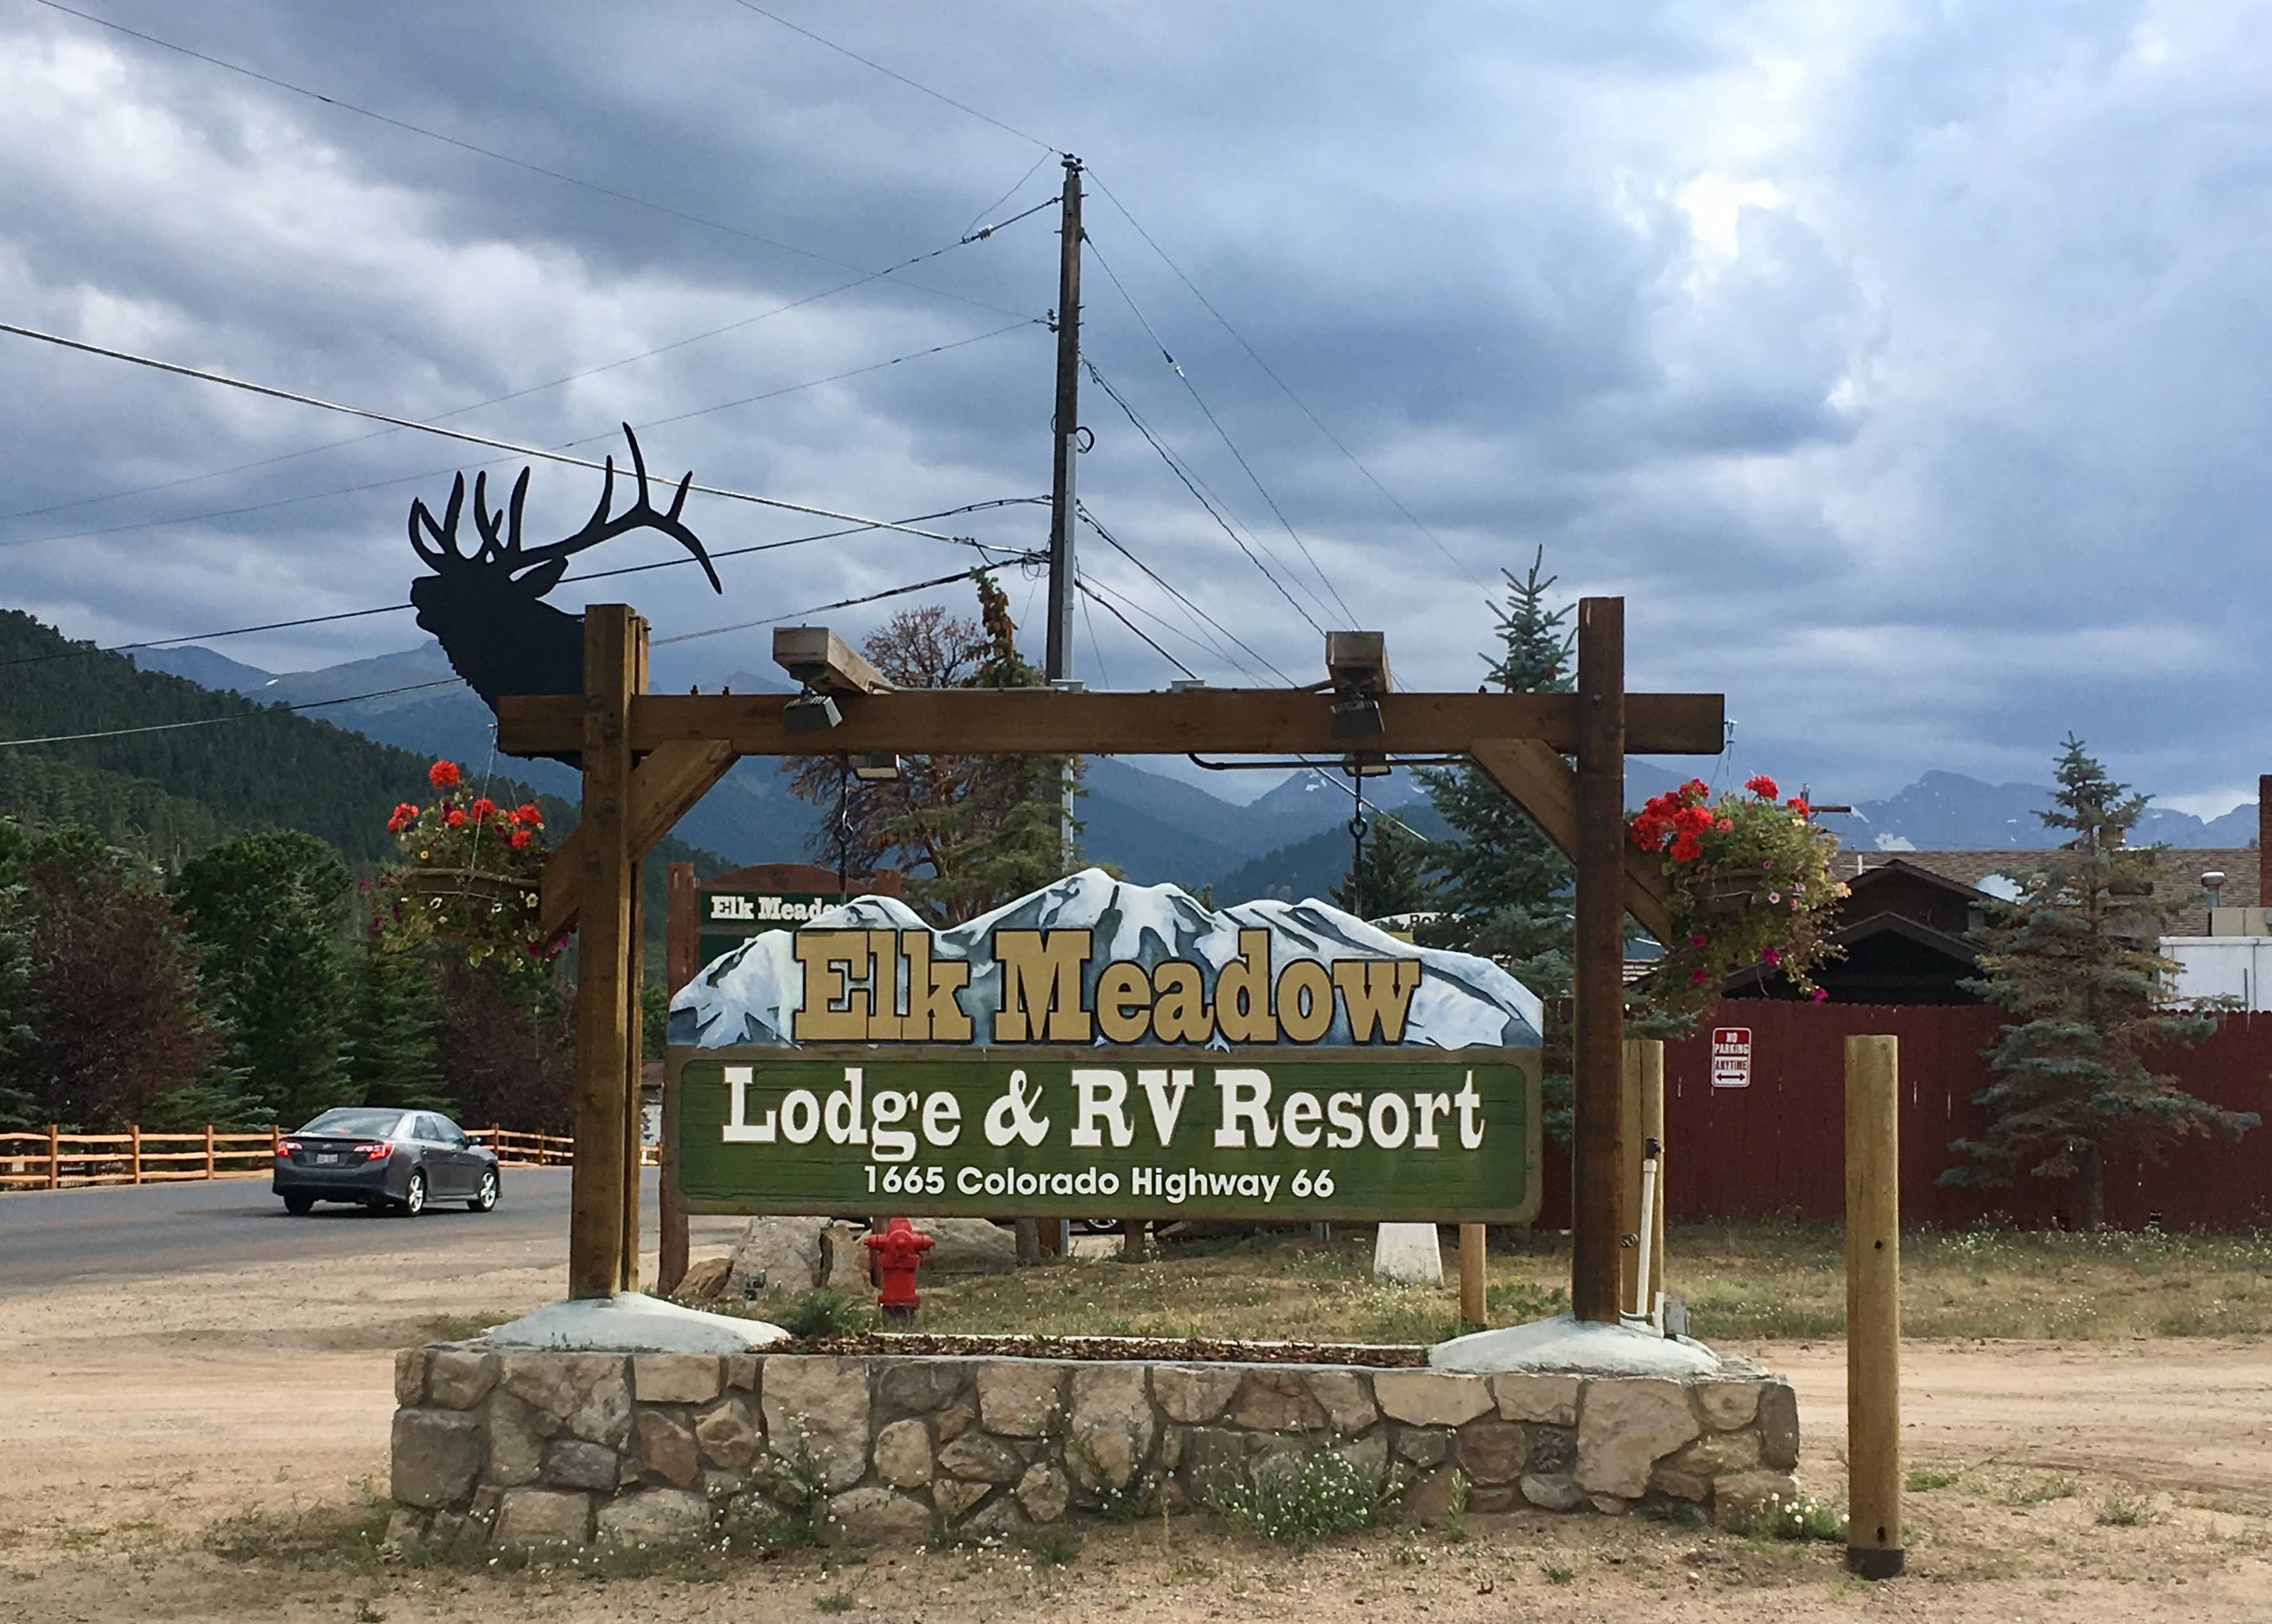 Camper submitted image from Elk Meadows Lodge & RV Resort - 2